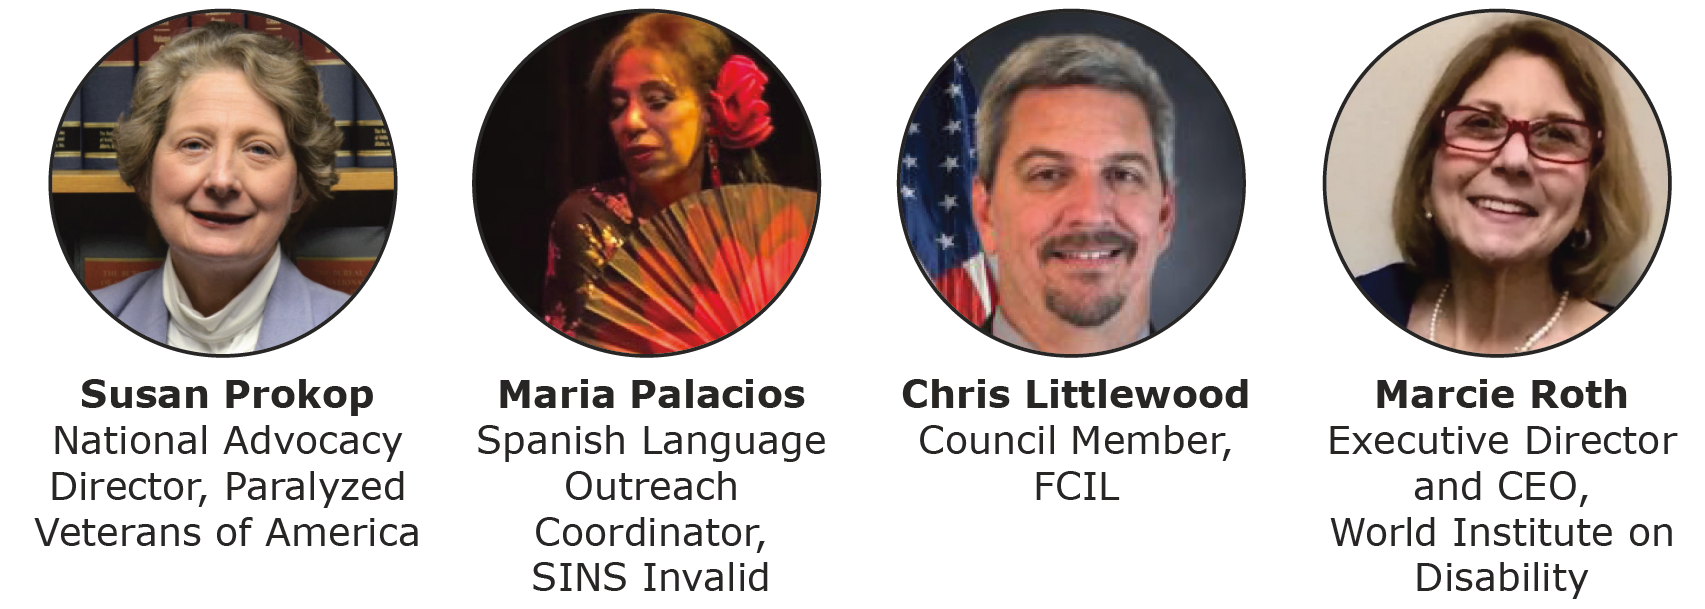 Photo of a middle-aged light skinned woman, with text: Susan Prokop, National Advocacy Director, Paralyzed Veterans of America. To the right is a photo of a middle-aged woman holding a red fan during a dance performance, with a red flower in her hair, with text: Maria Palacios, Spanish Language Outreach Coordinator, SINS Invalid. To the right is a photo of a light skinned middle-aged man In front of an American flag, with text: Chris Littlewood, Council Member, Florida Independent Living Council. To the right as a photo of a middle-aged light-skinned woman, with taxed: Marcie Roth, executive Director and CEO, World Institute on Disability.